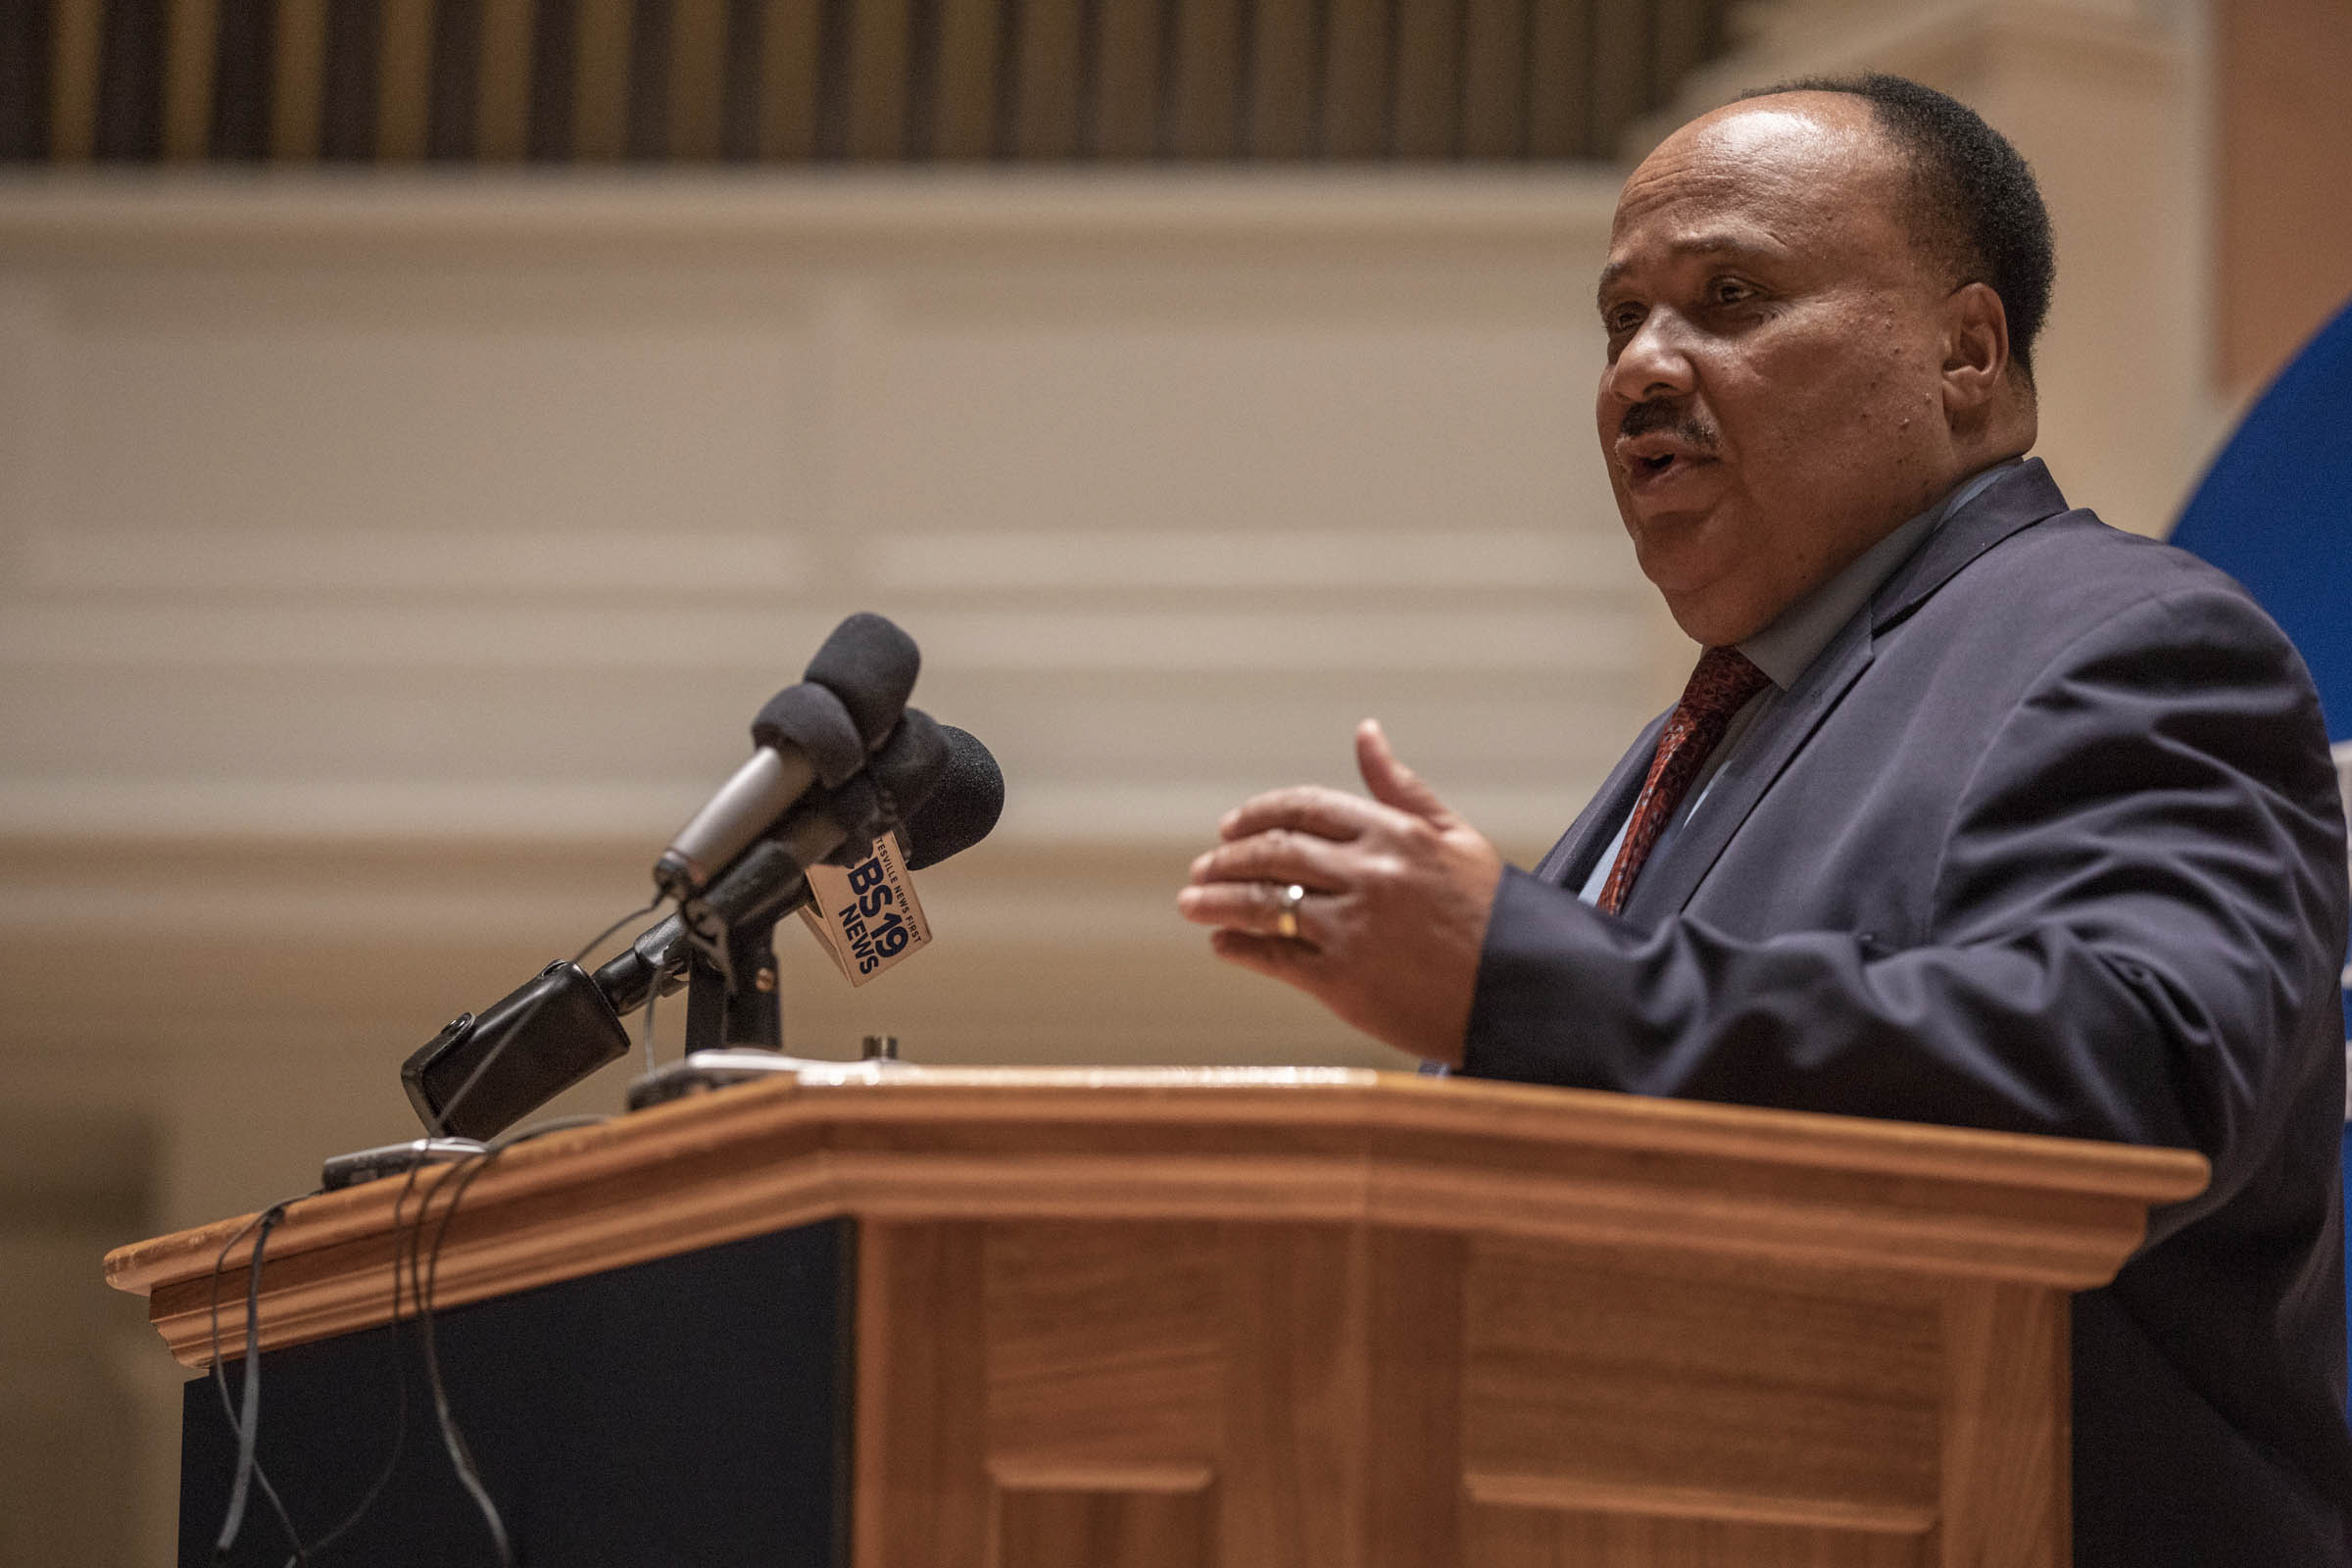 Martin Luther King III speaking at a podium